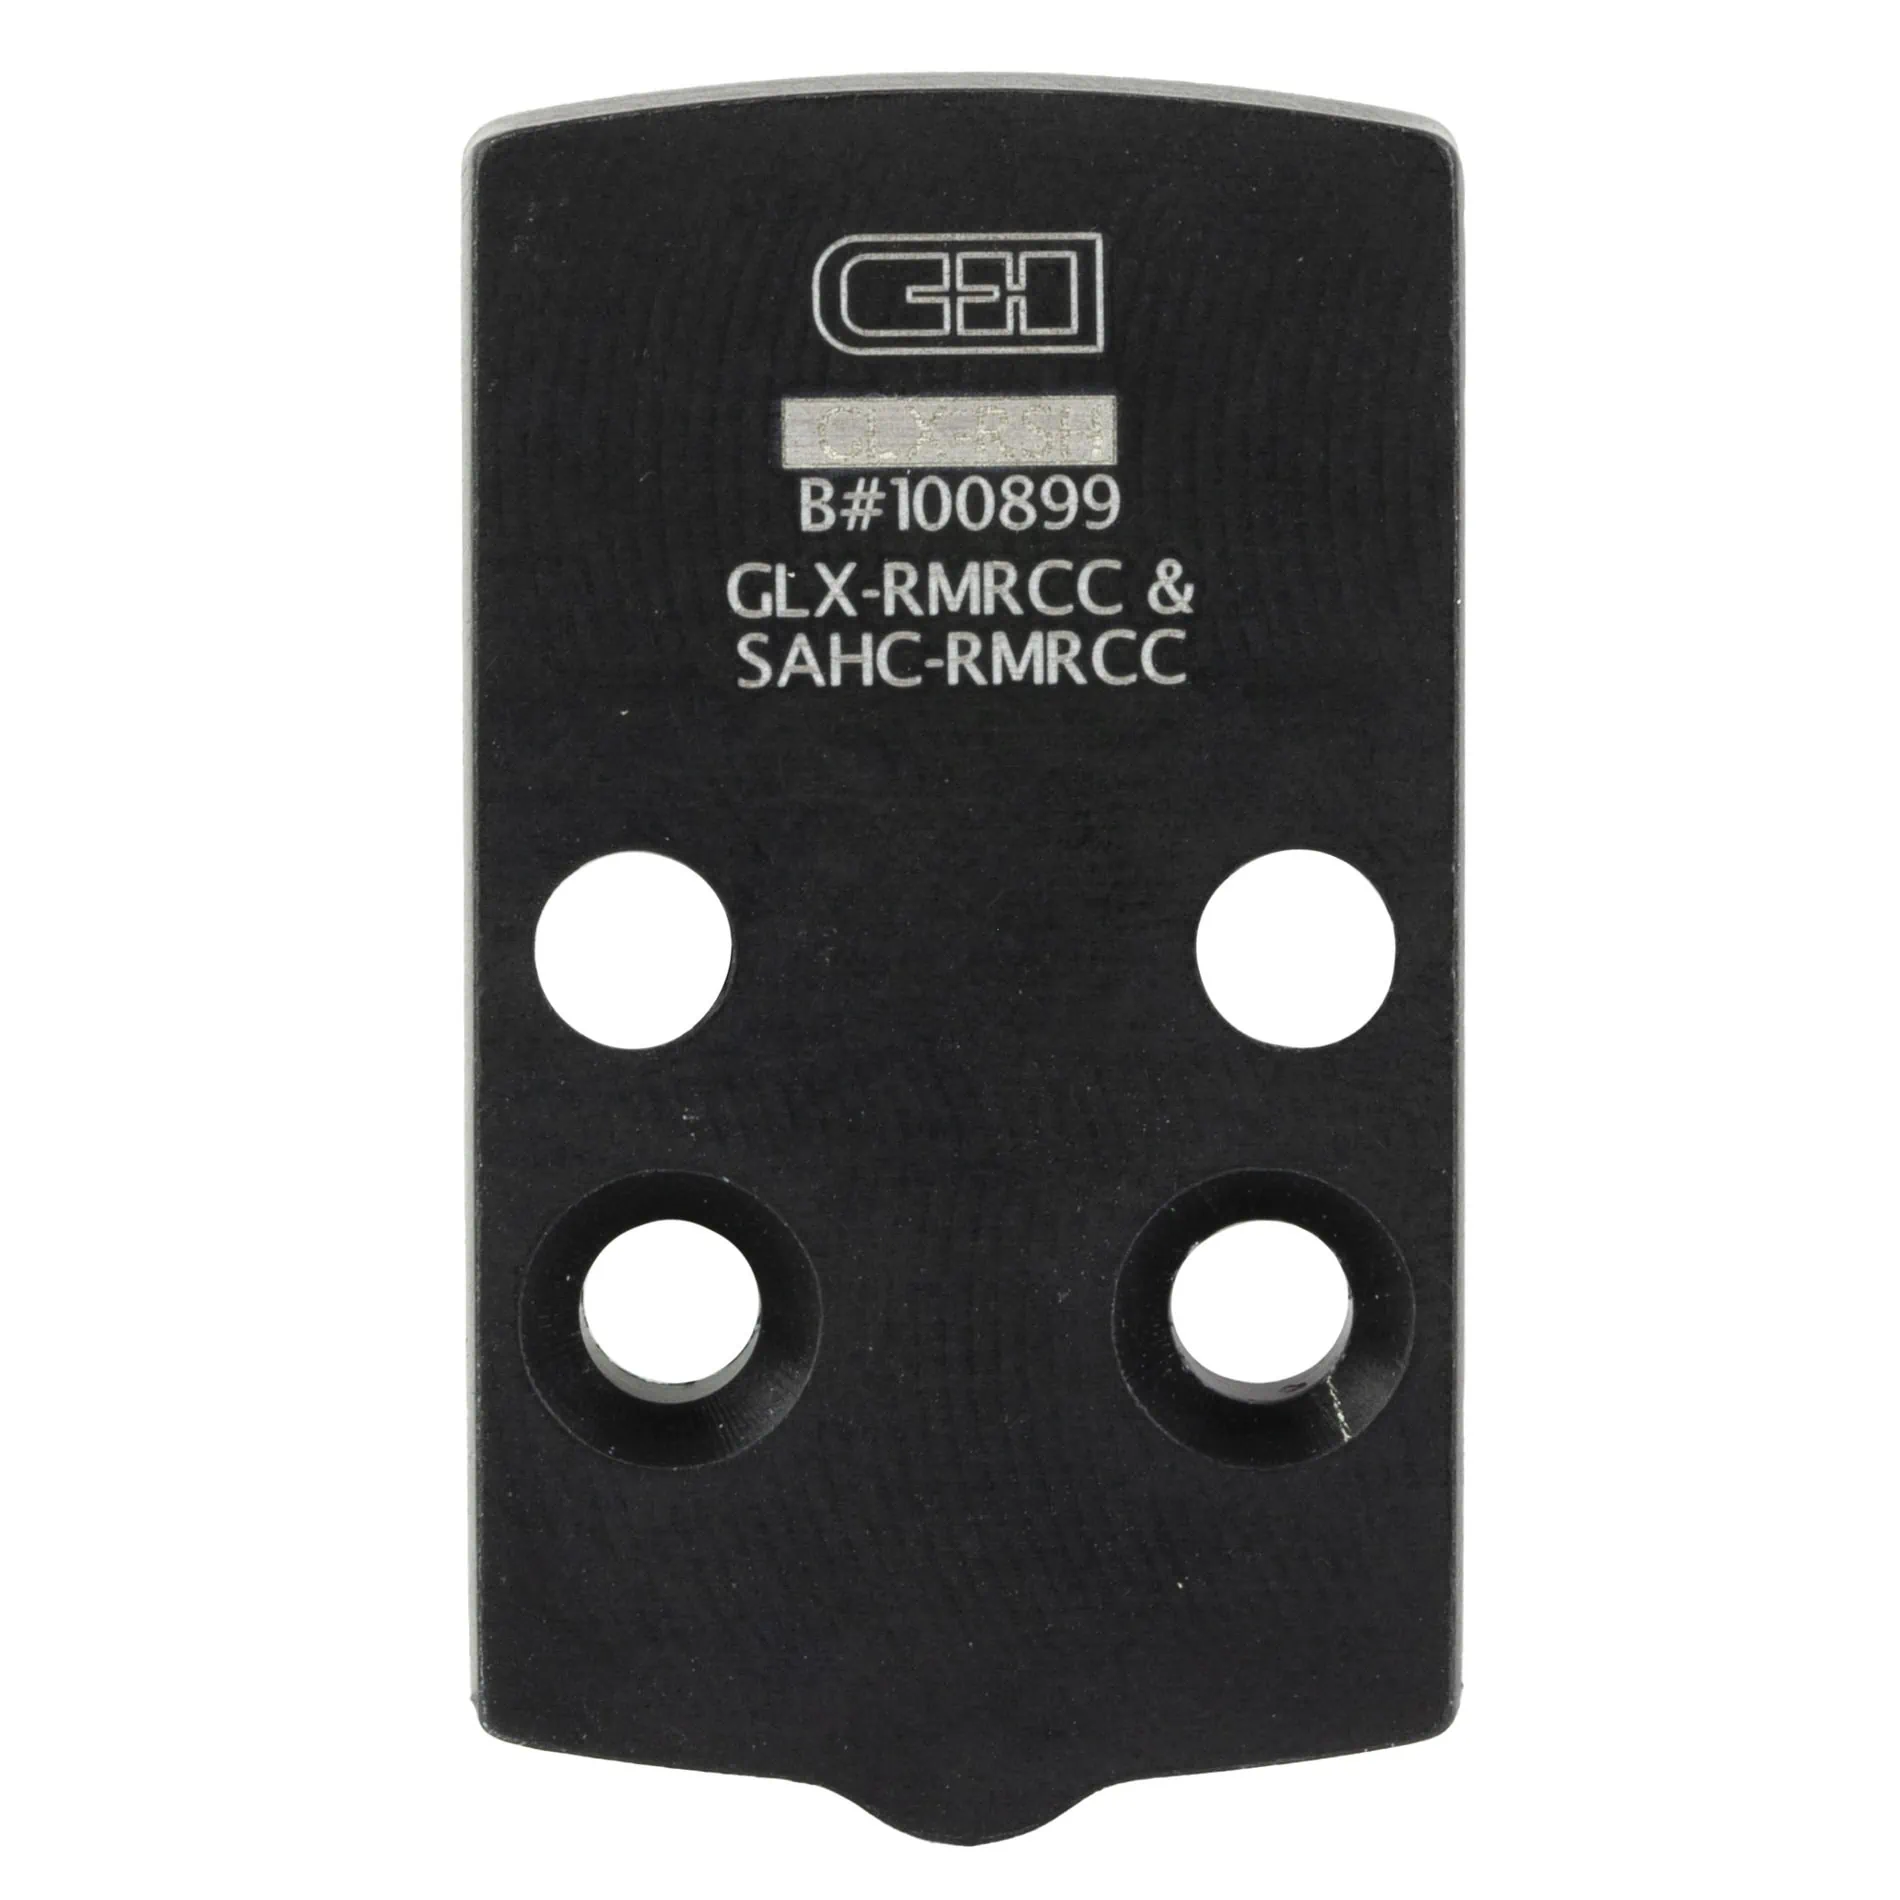 C&H Precision Glock 43X/48 MOS Optic Adapter Plates for RMR, RMRcc, EPS, and 407K/507K